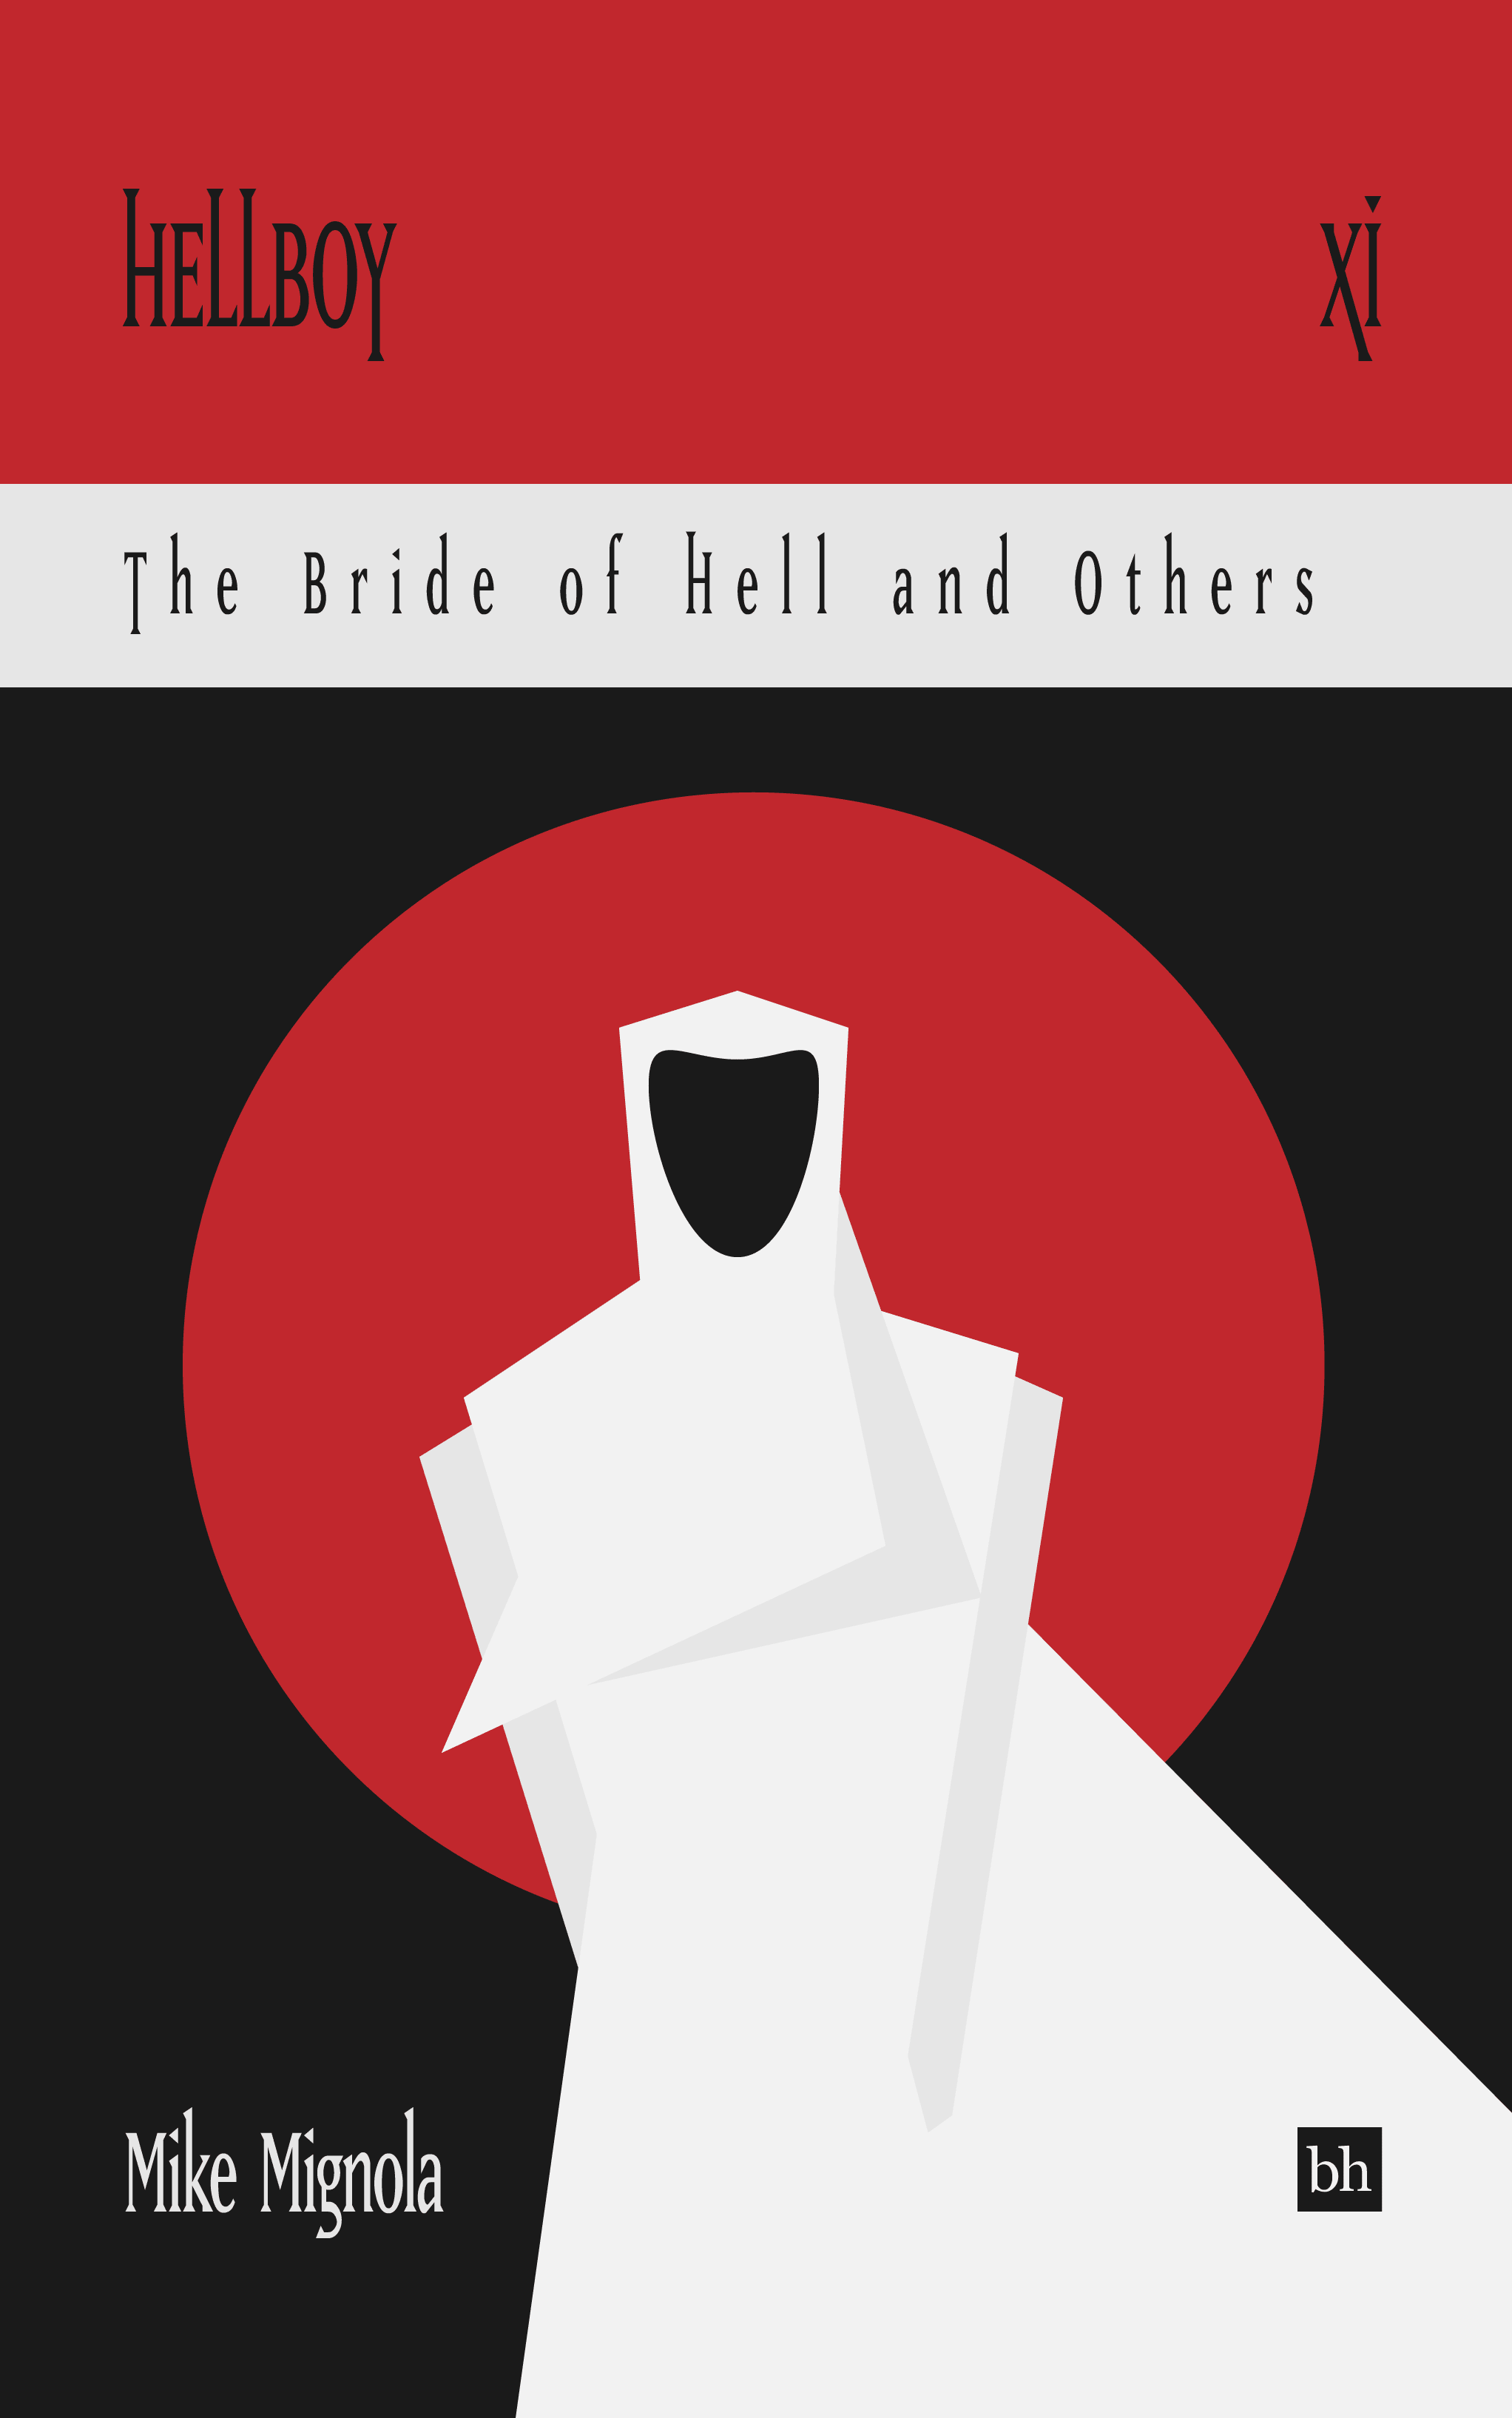 Book cover mock thumbnail for Hellboy: The Bride of Hell and Others